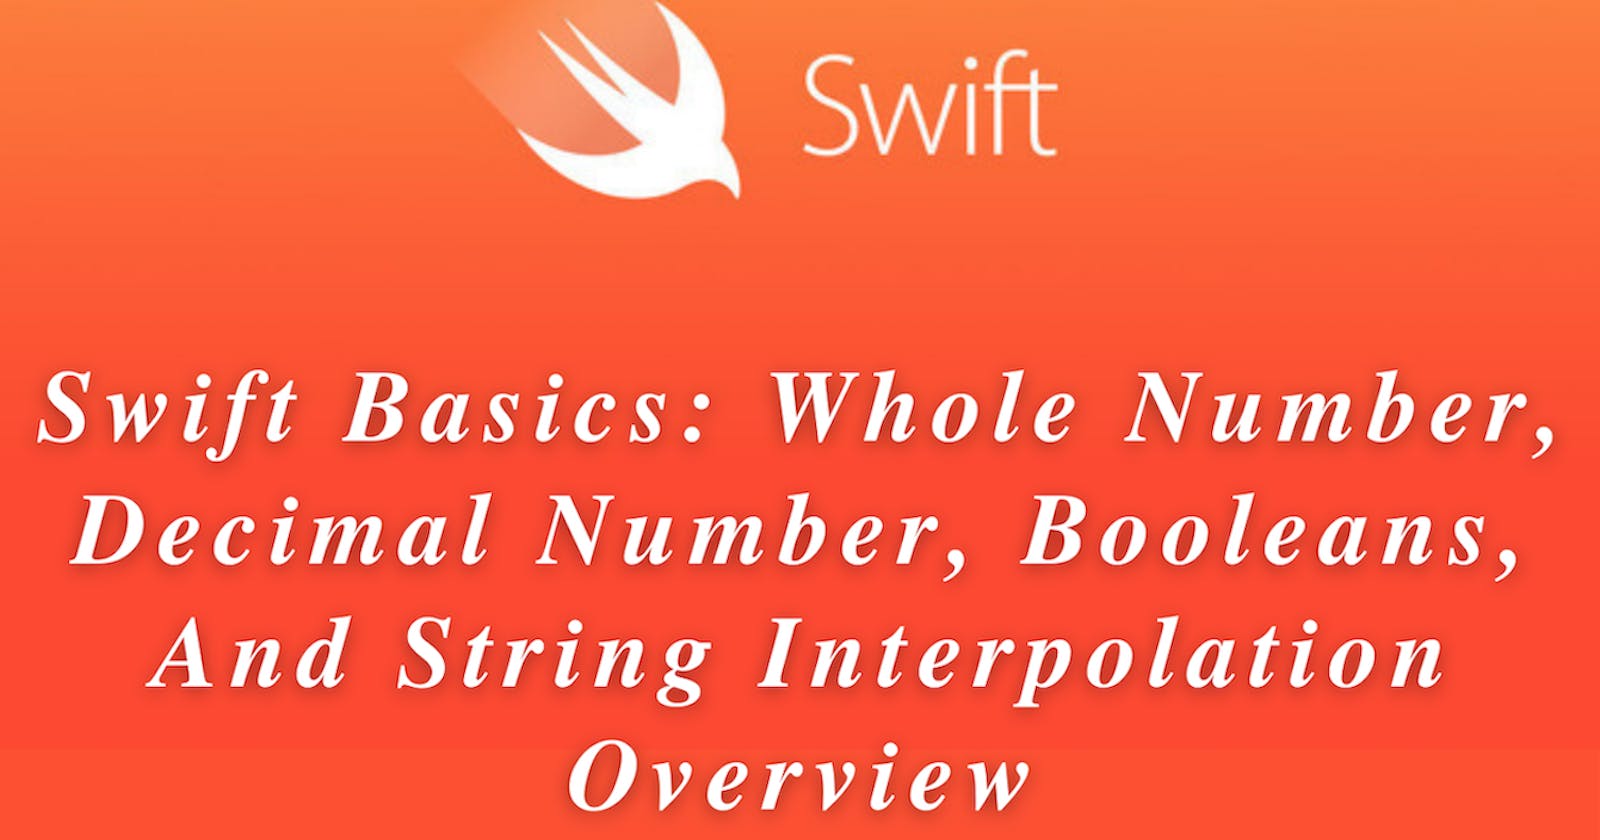 Swift Basics: Whole Number, Decimal Number, Booleans, And String Interpolation Overview